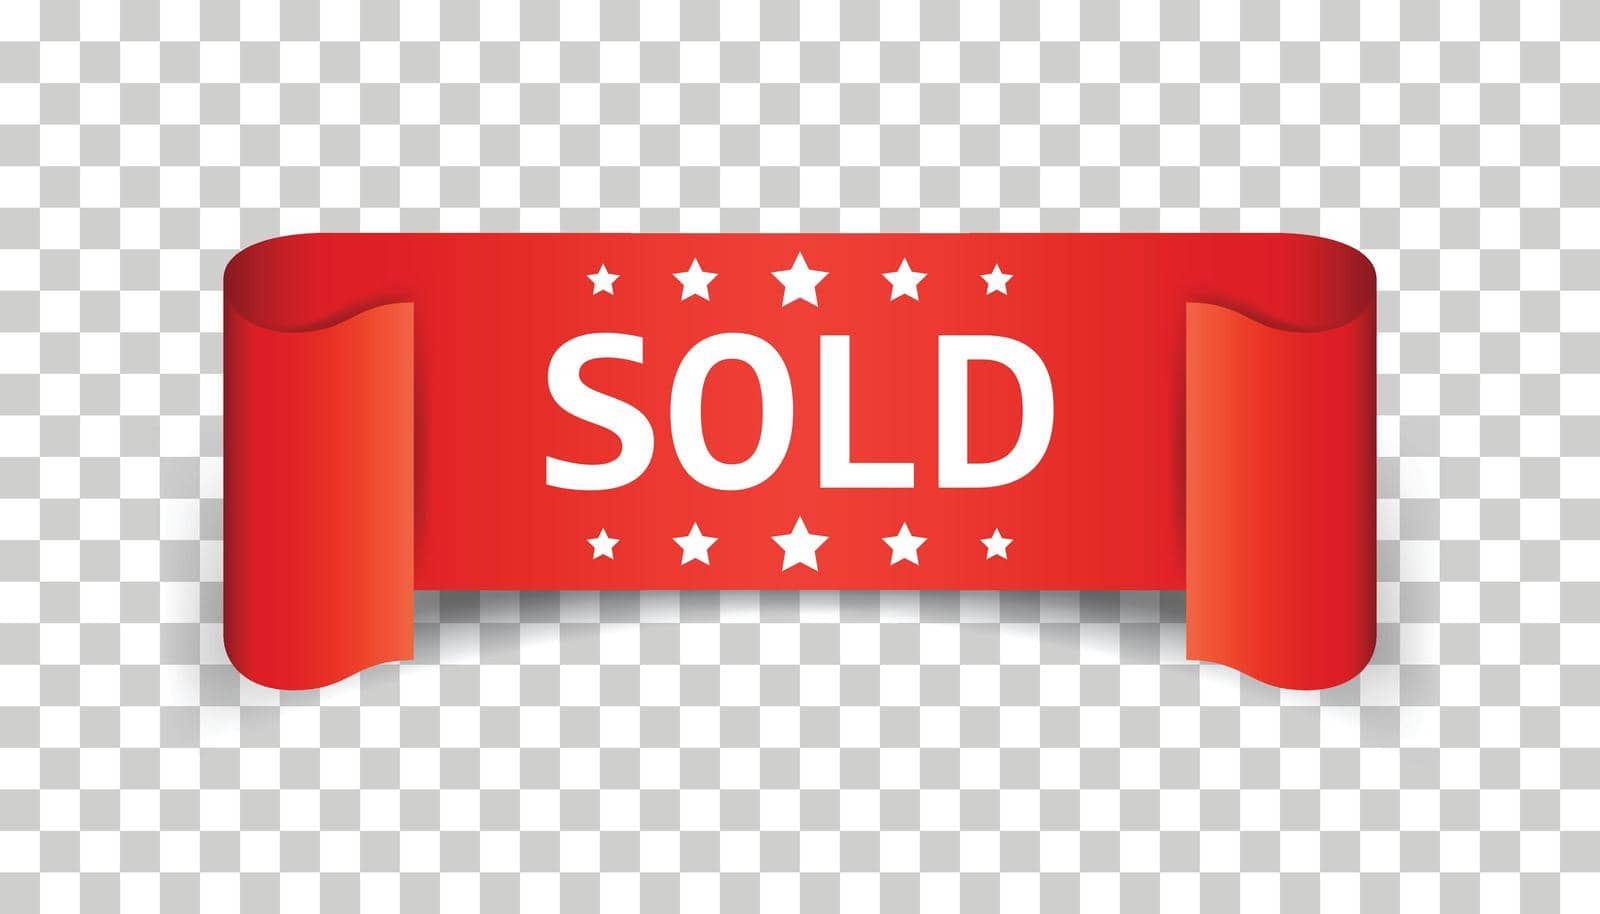 Sold ribbon vector icon. Discount, sale sticker label on isolated background.